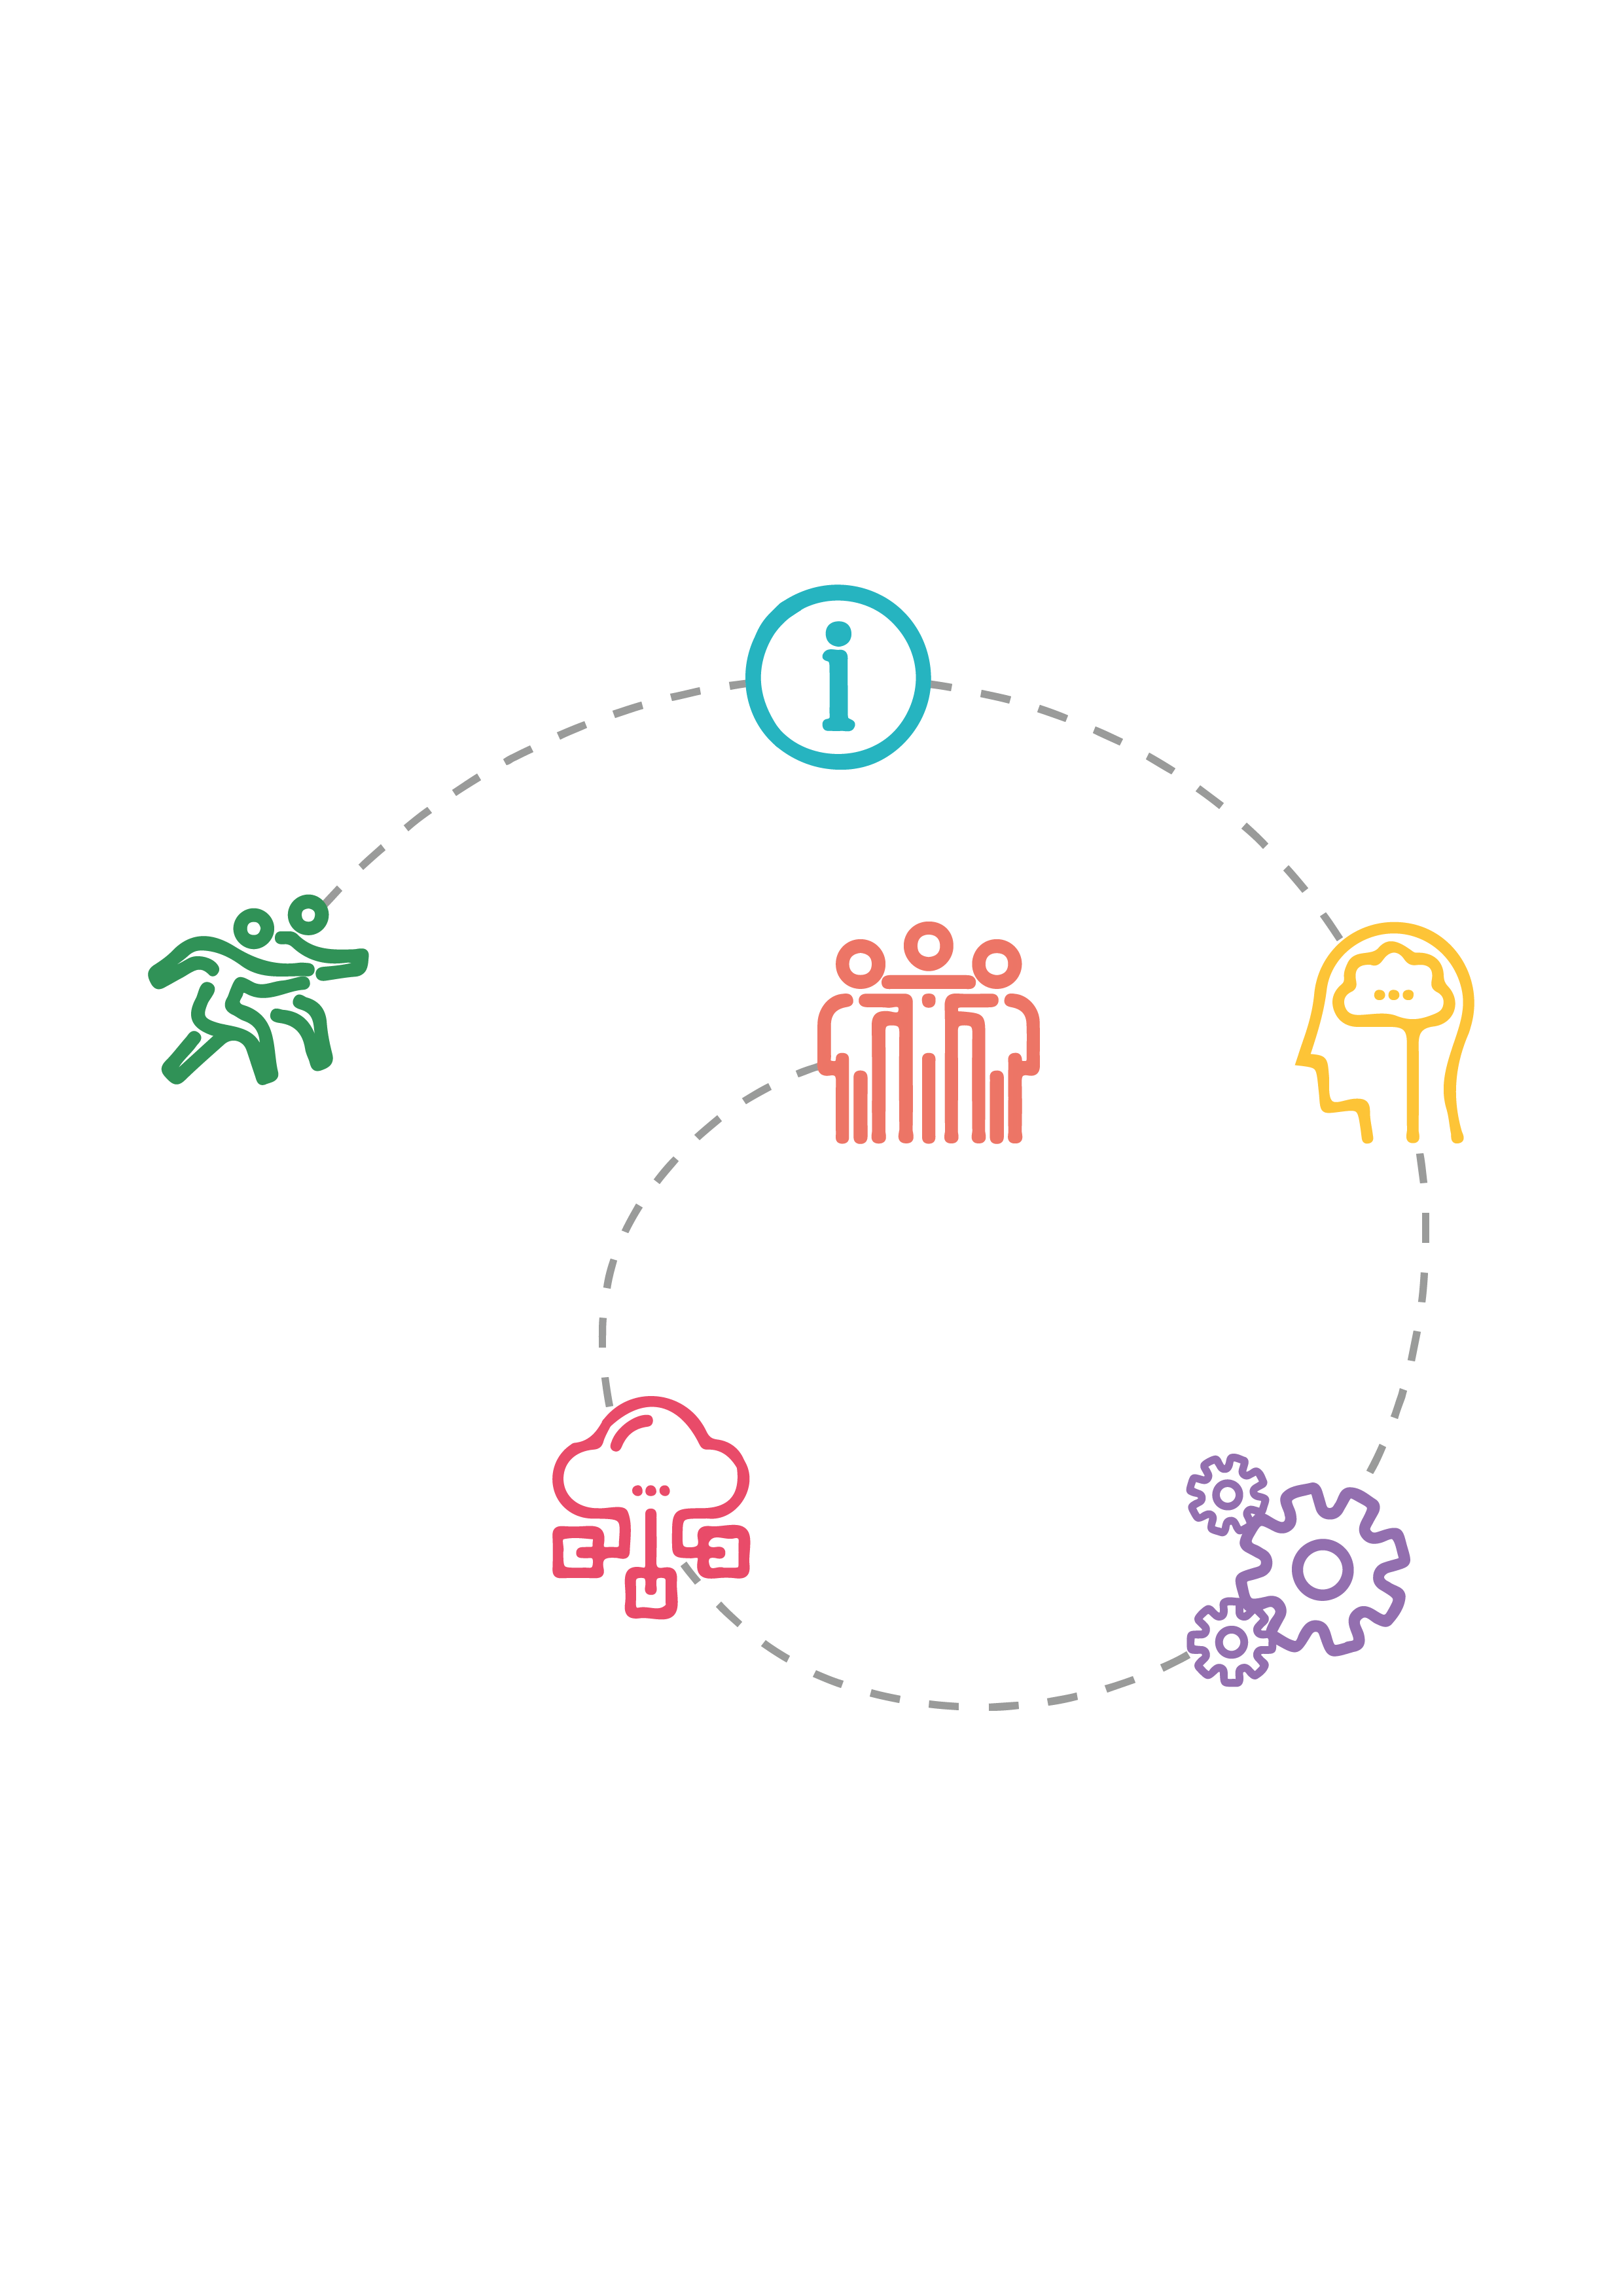 This infographic shows a developmental scheme: work together, learn, brainstorm, work, share, build your community. Each step is depicted by a small colorful icon conceptually realated. It all is included in a spiral.